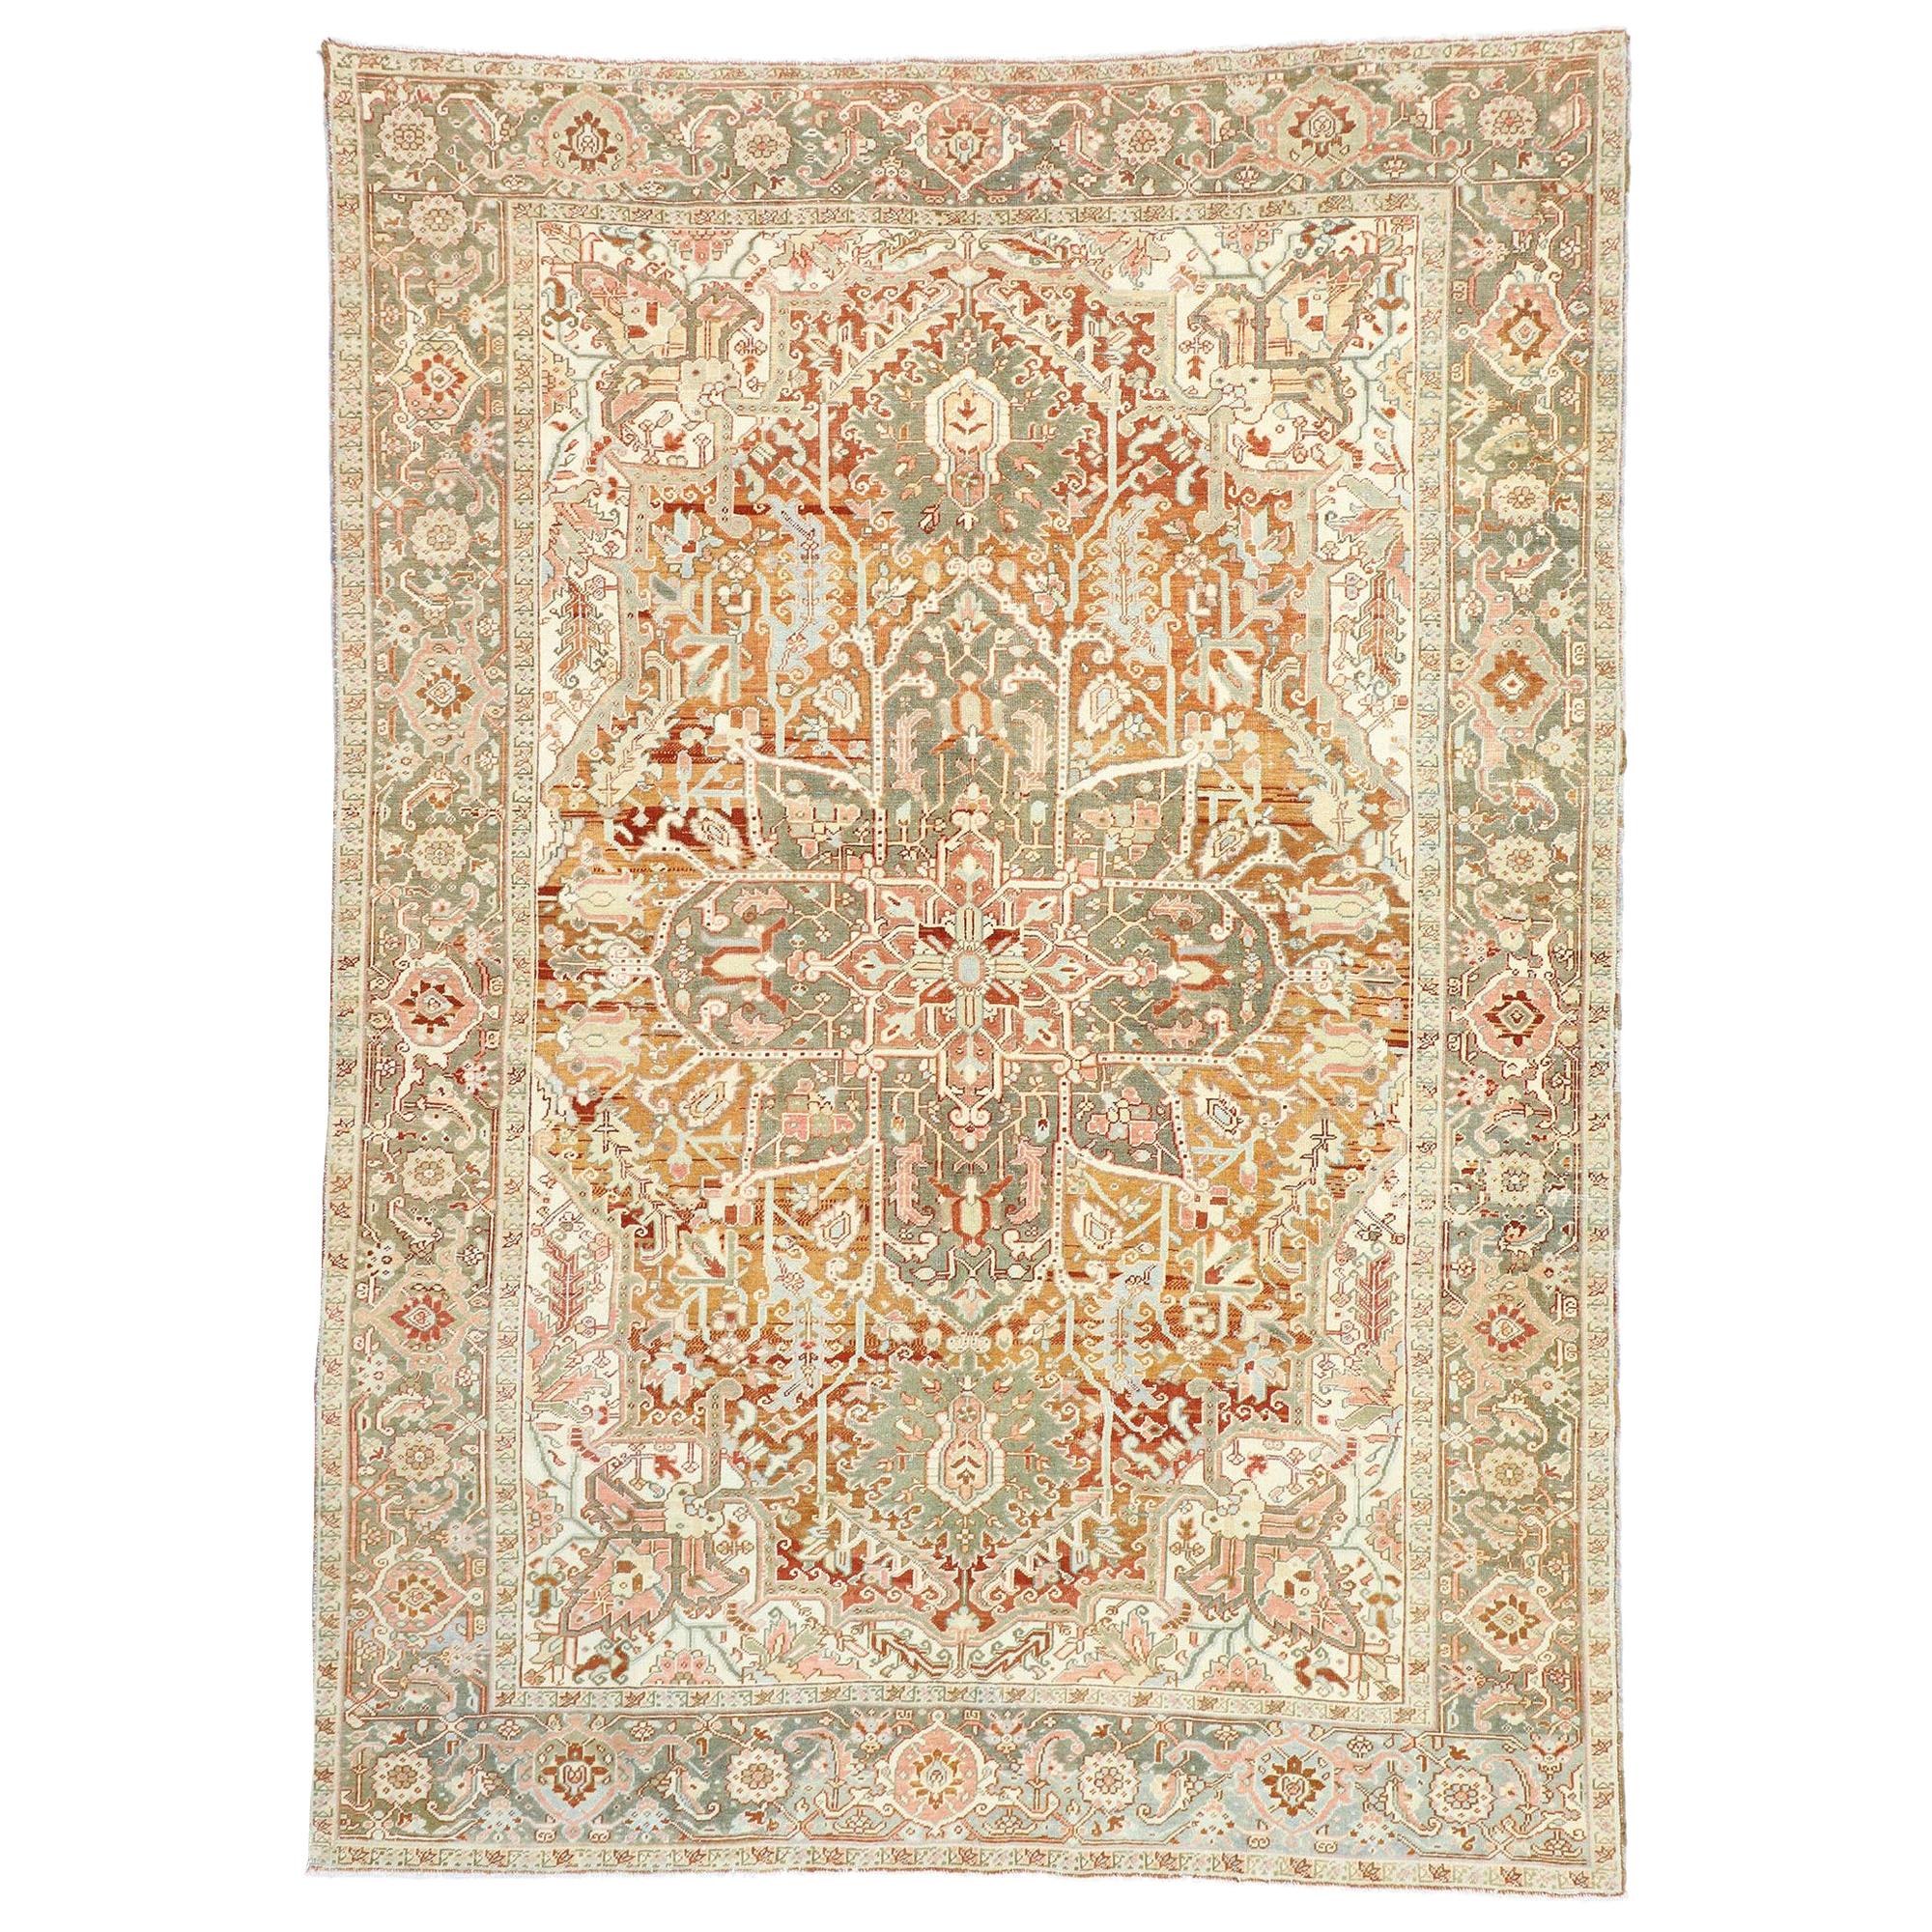 Antique Persian Heriz Design Rug with Rustic Arts & Crafts Style For Sale